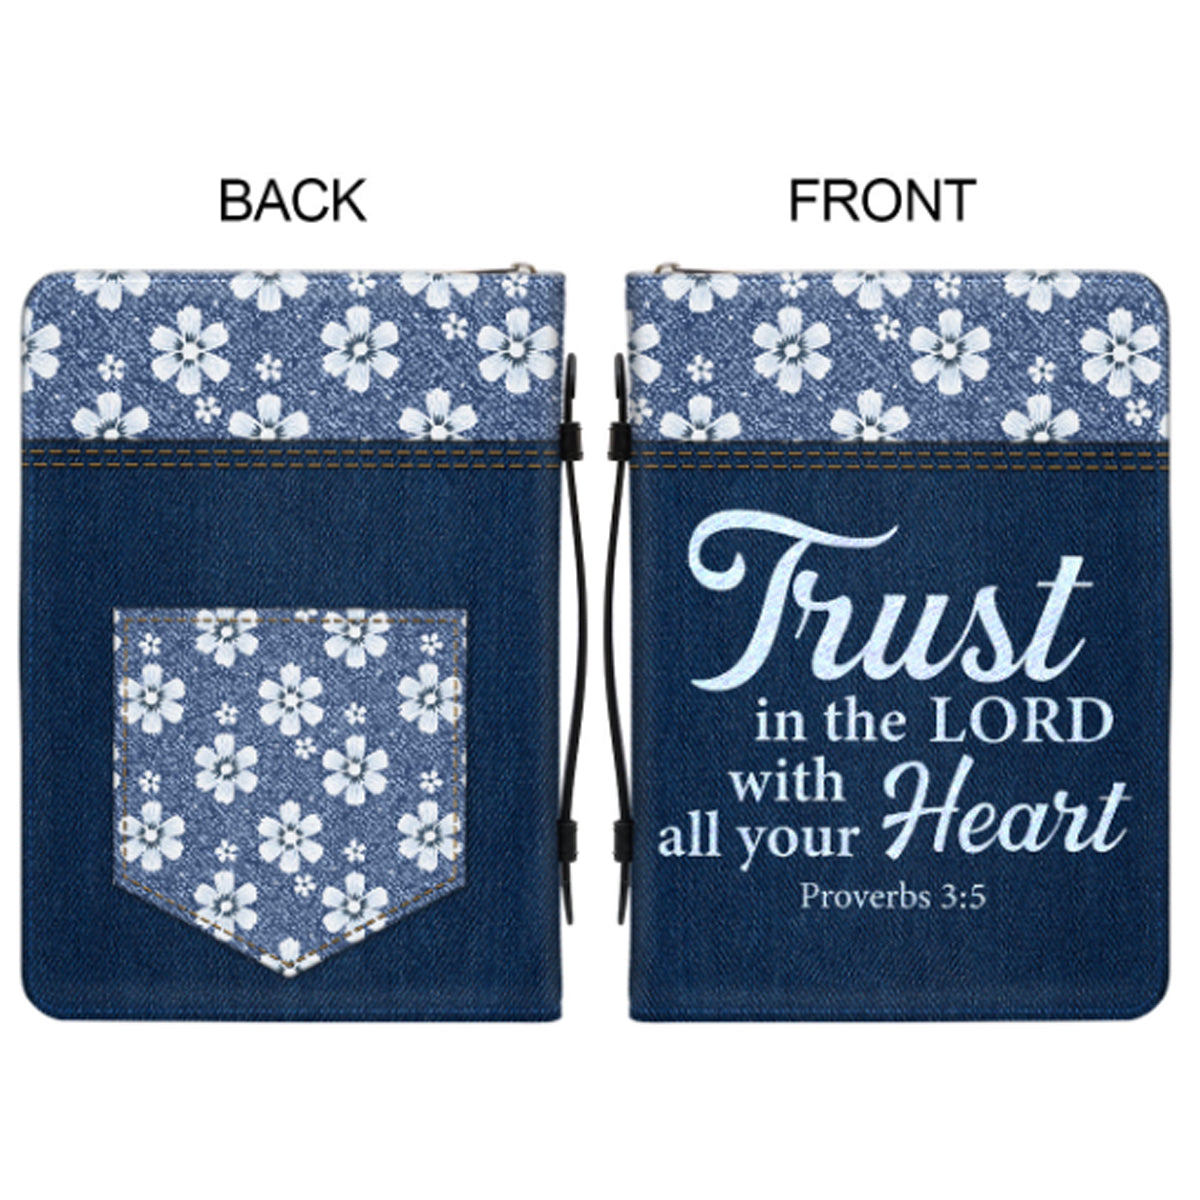 Christianartbag Bible Cover, Trust In The Lord With All Your Heart Daisy Flower Bible Cover, Personalized Bible Cover, CABBBCV08030823. - Christian Art Bag